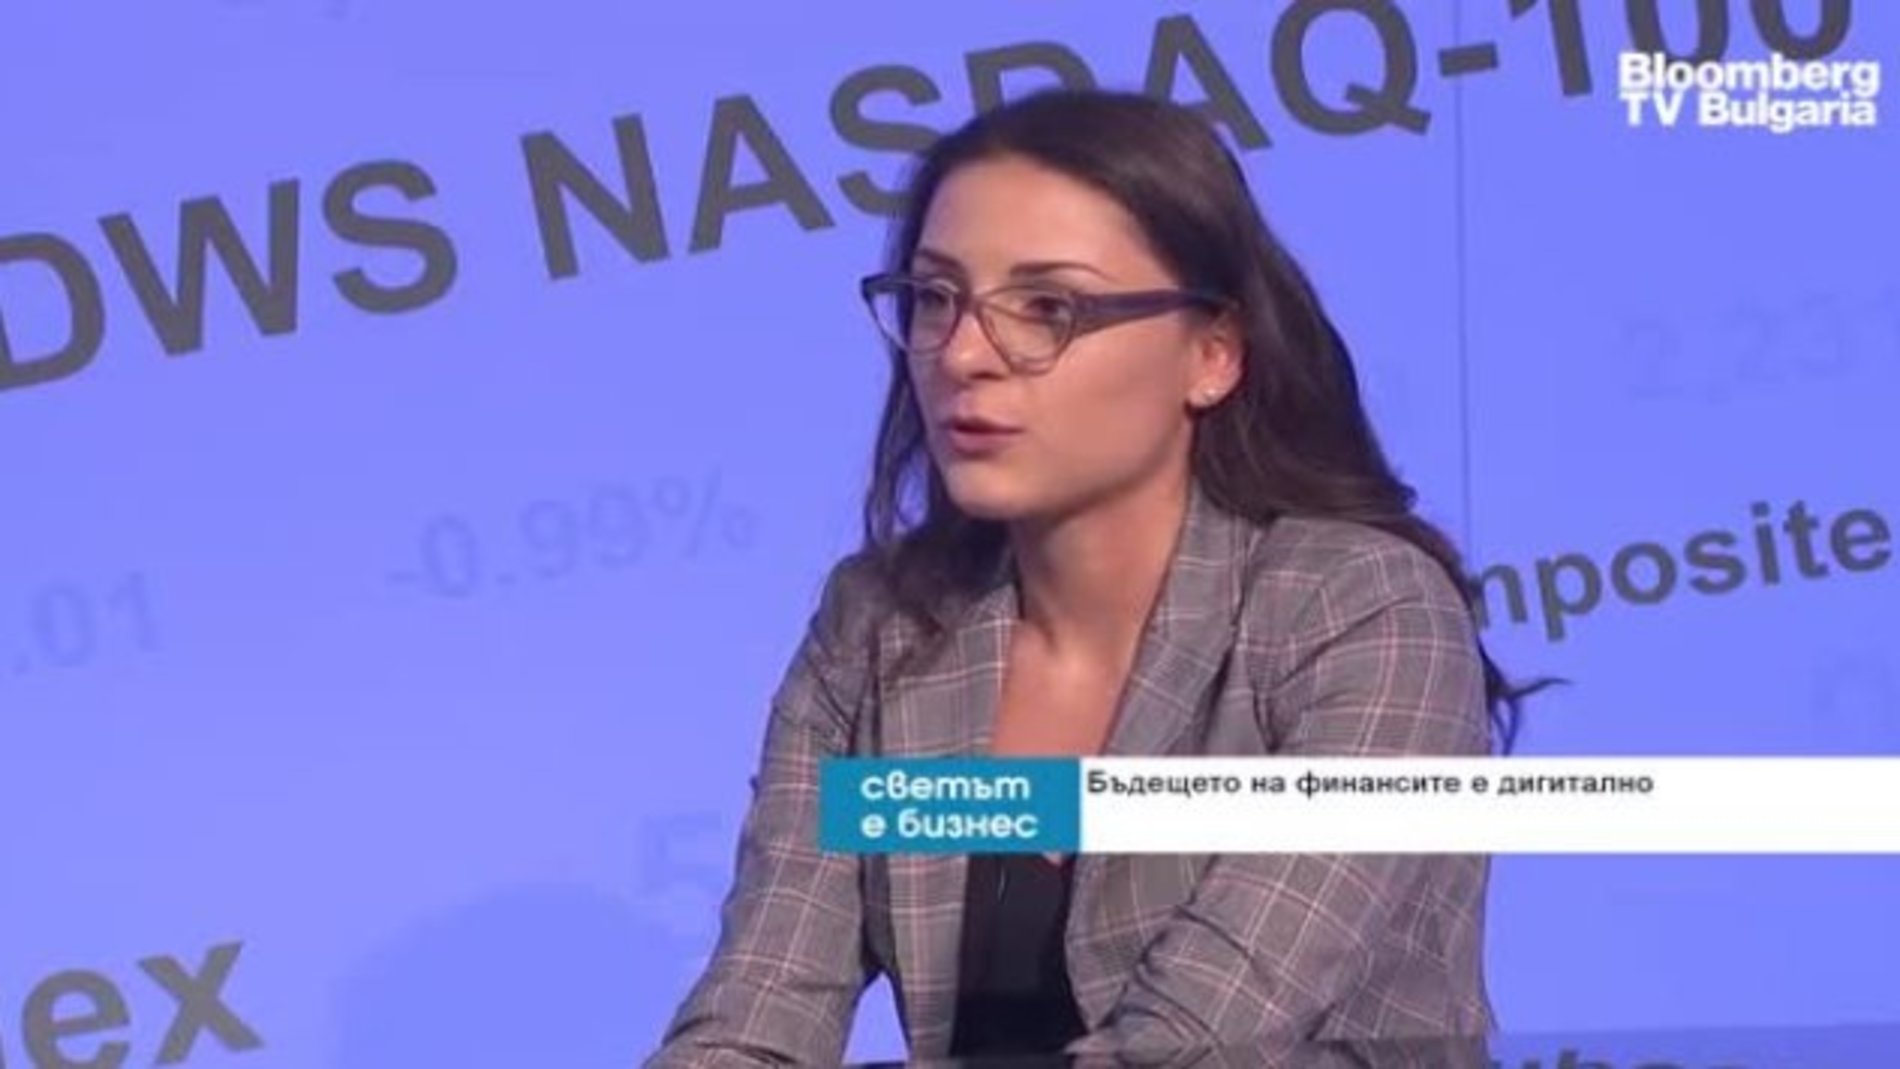 Enterprise Blockchain, CBDC, and R3: An Interview by Bloomberg TV with INDUSTRIA Business Operation Manager Kalina Tonkovska